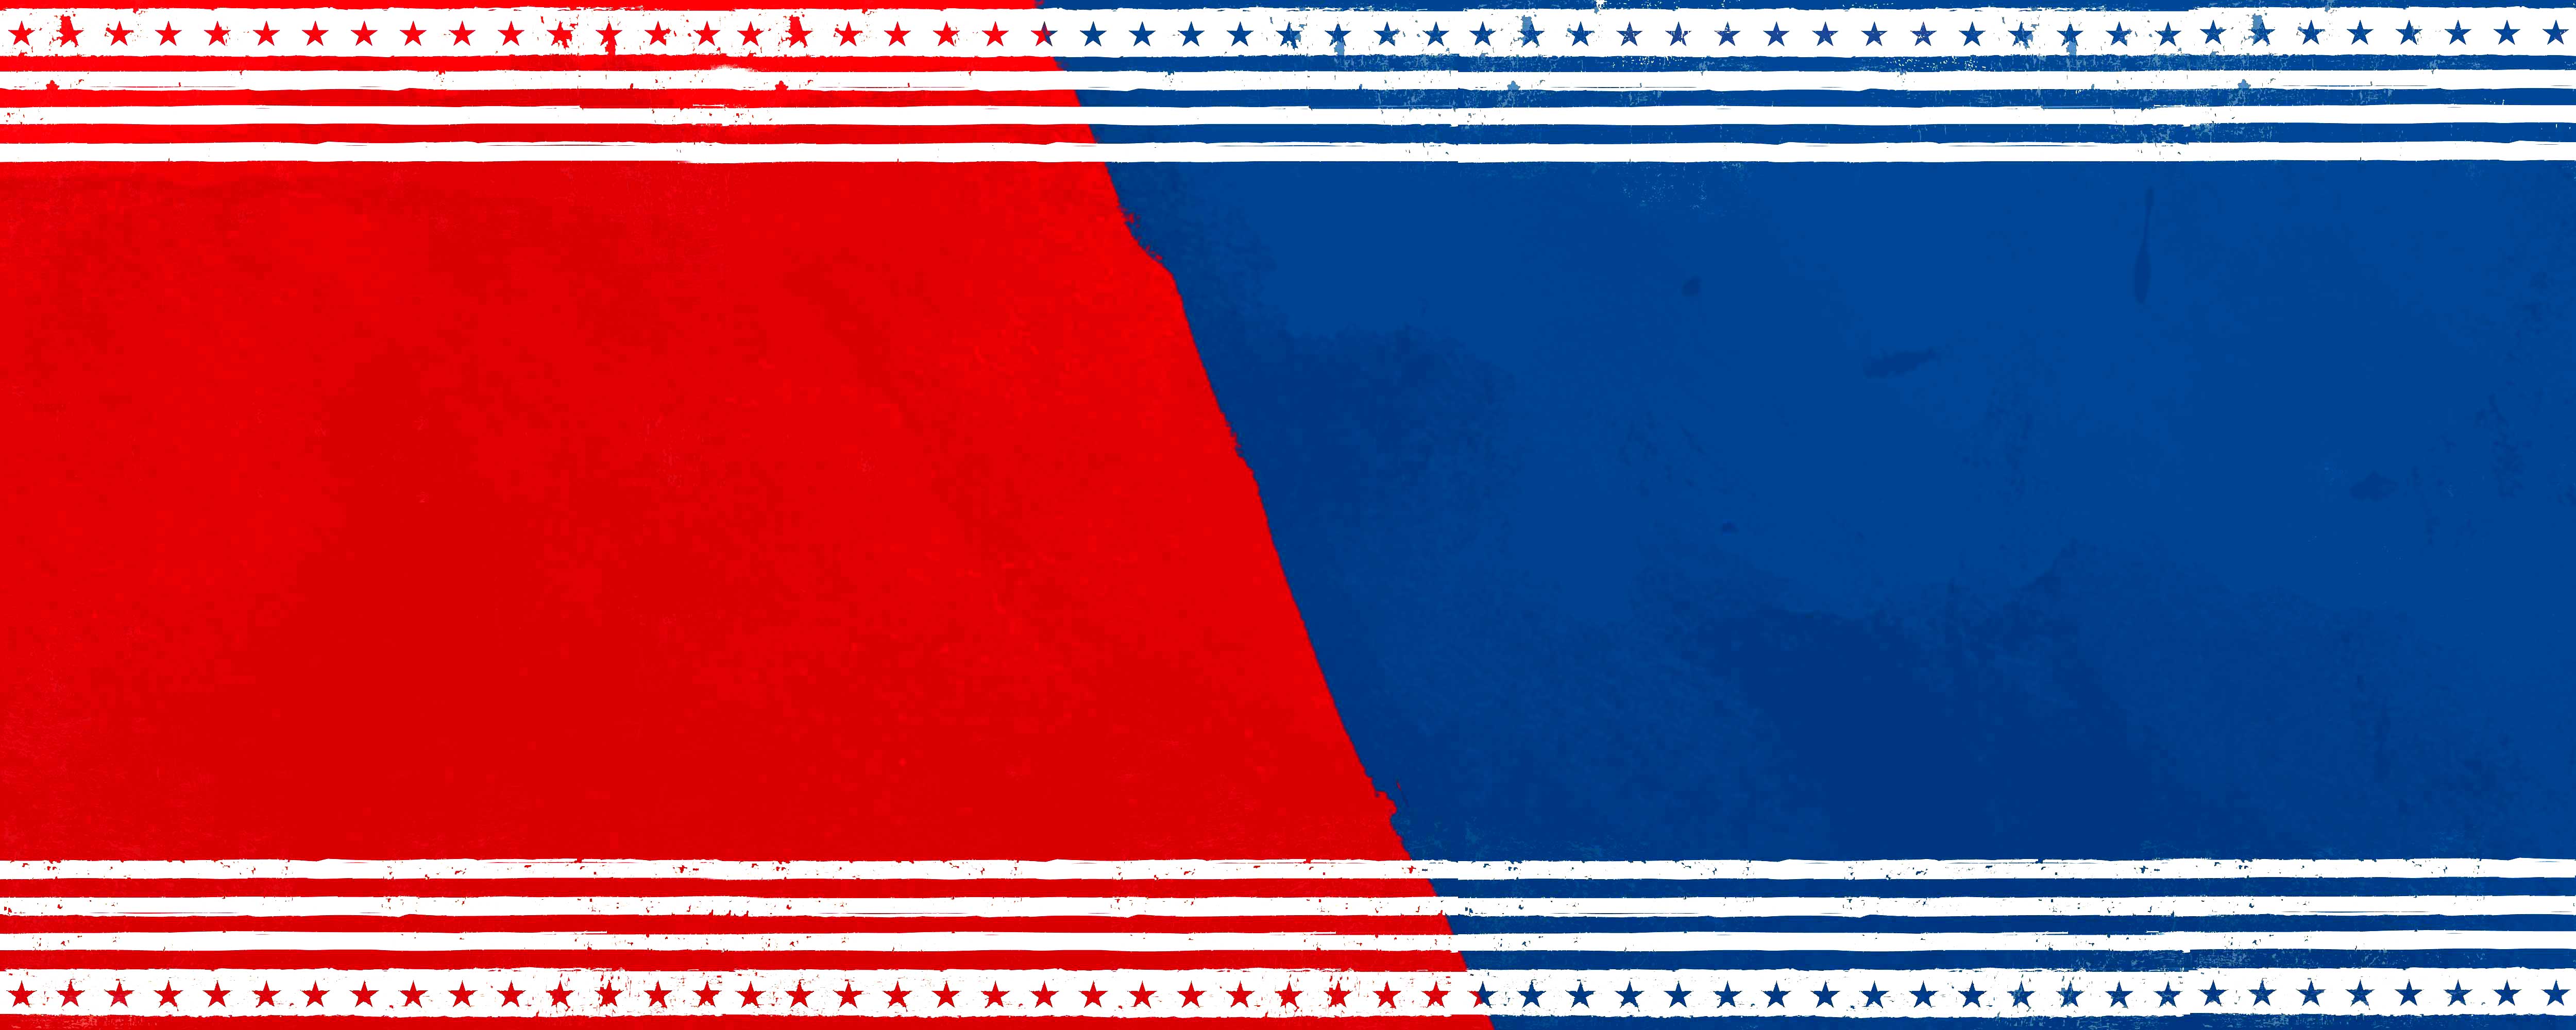 Top and bottom have a white lines as a boarder with the outer most line having stars.  There is a diagonal line.  The left side of the image is red the right is blue